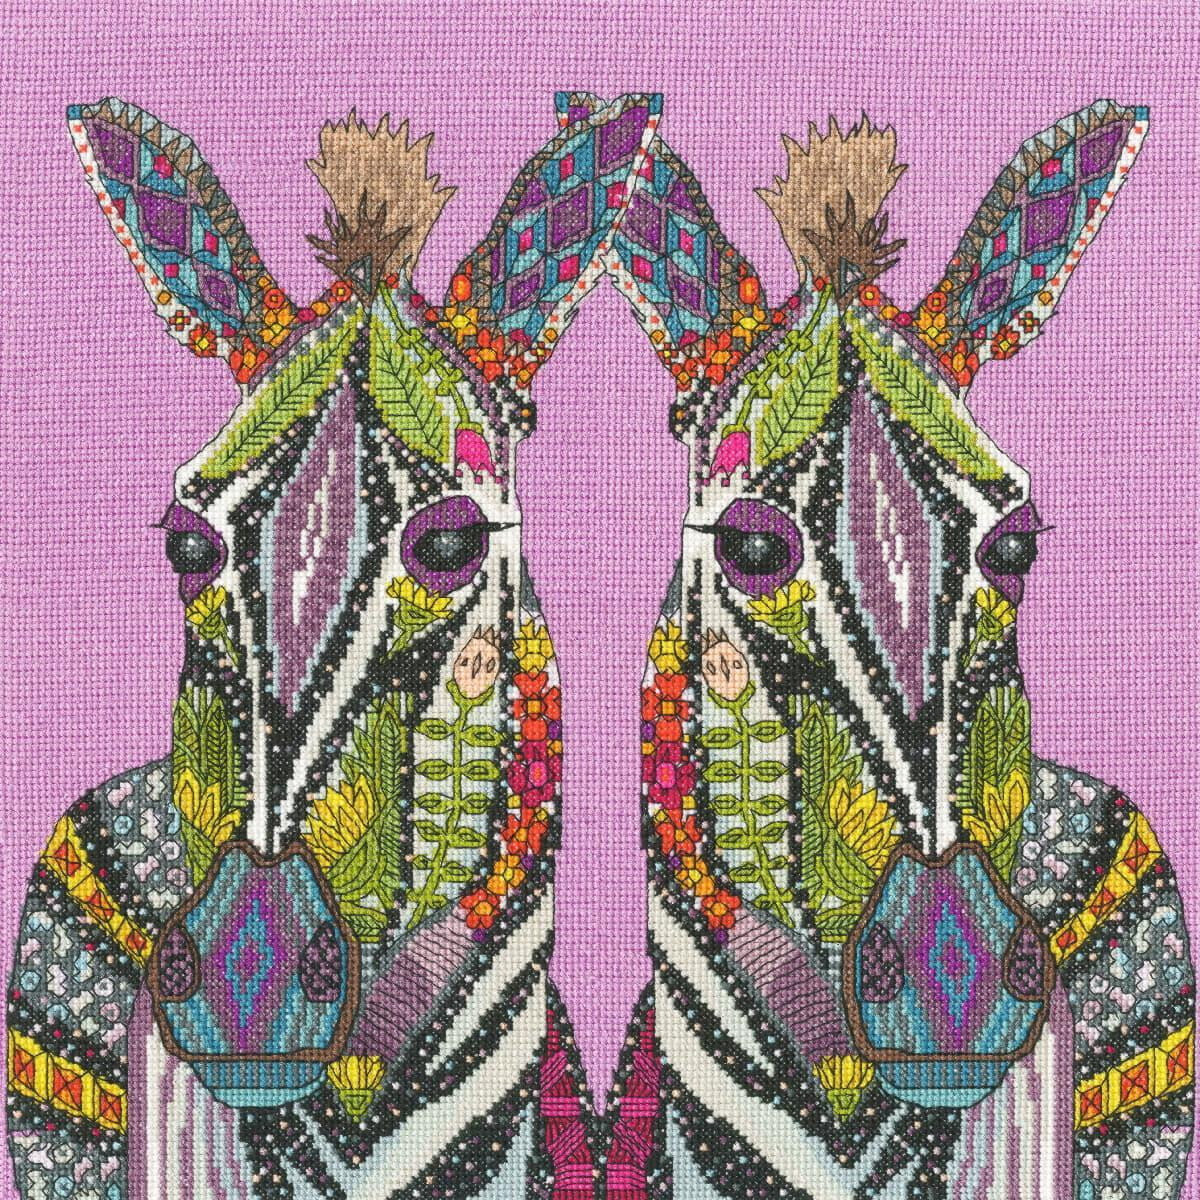 Two donkeys with intricate, colorful and patterned...